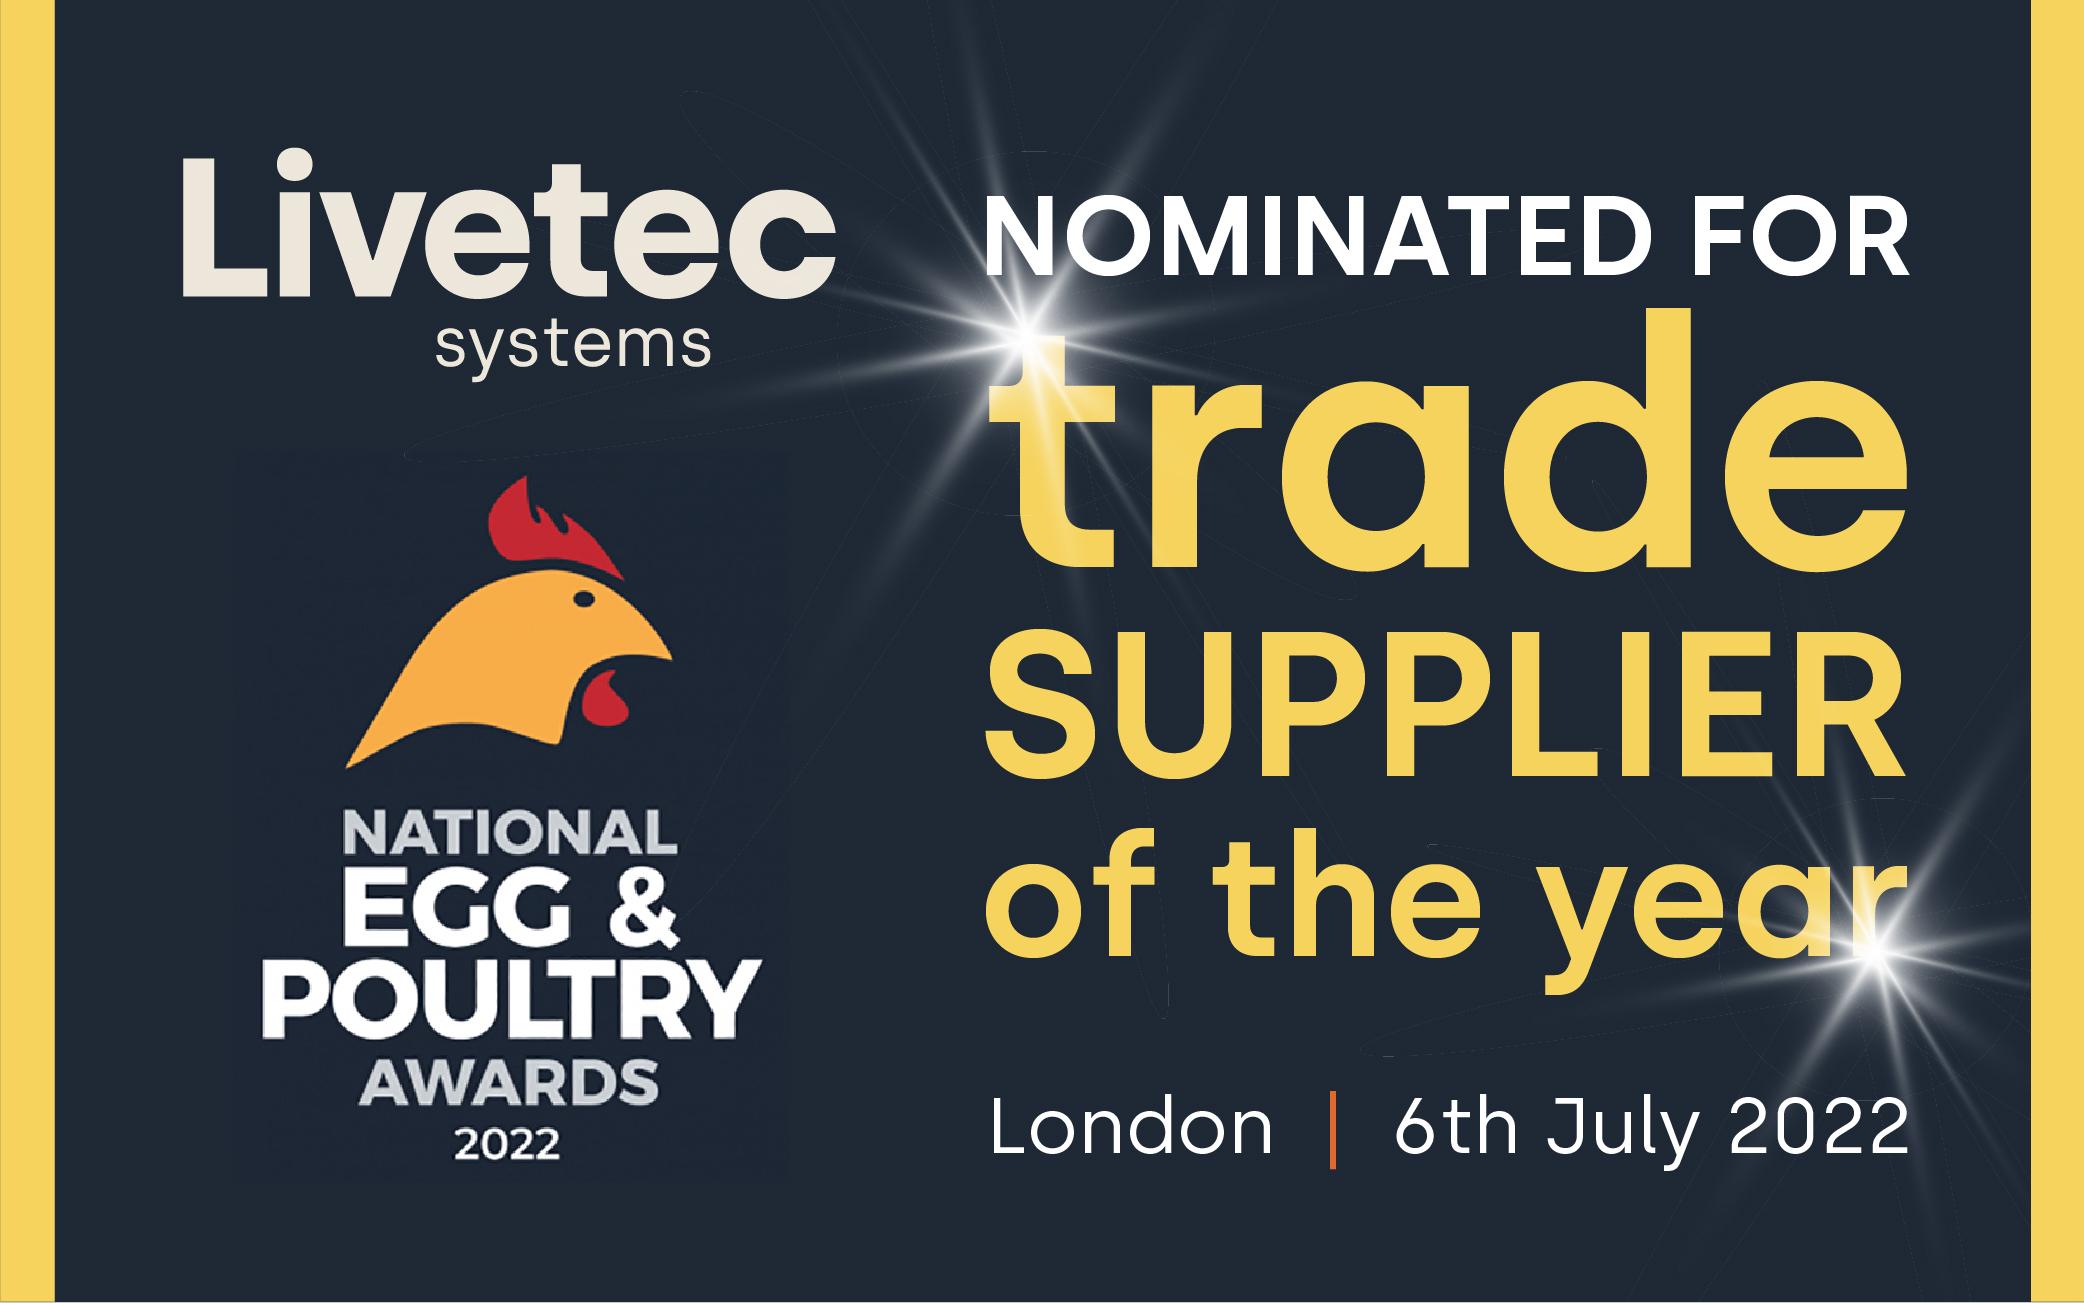 The Livetec team attends the National Egg and Poultry Awards